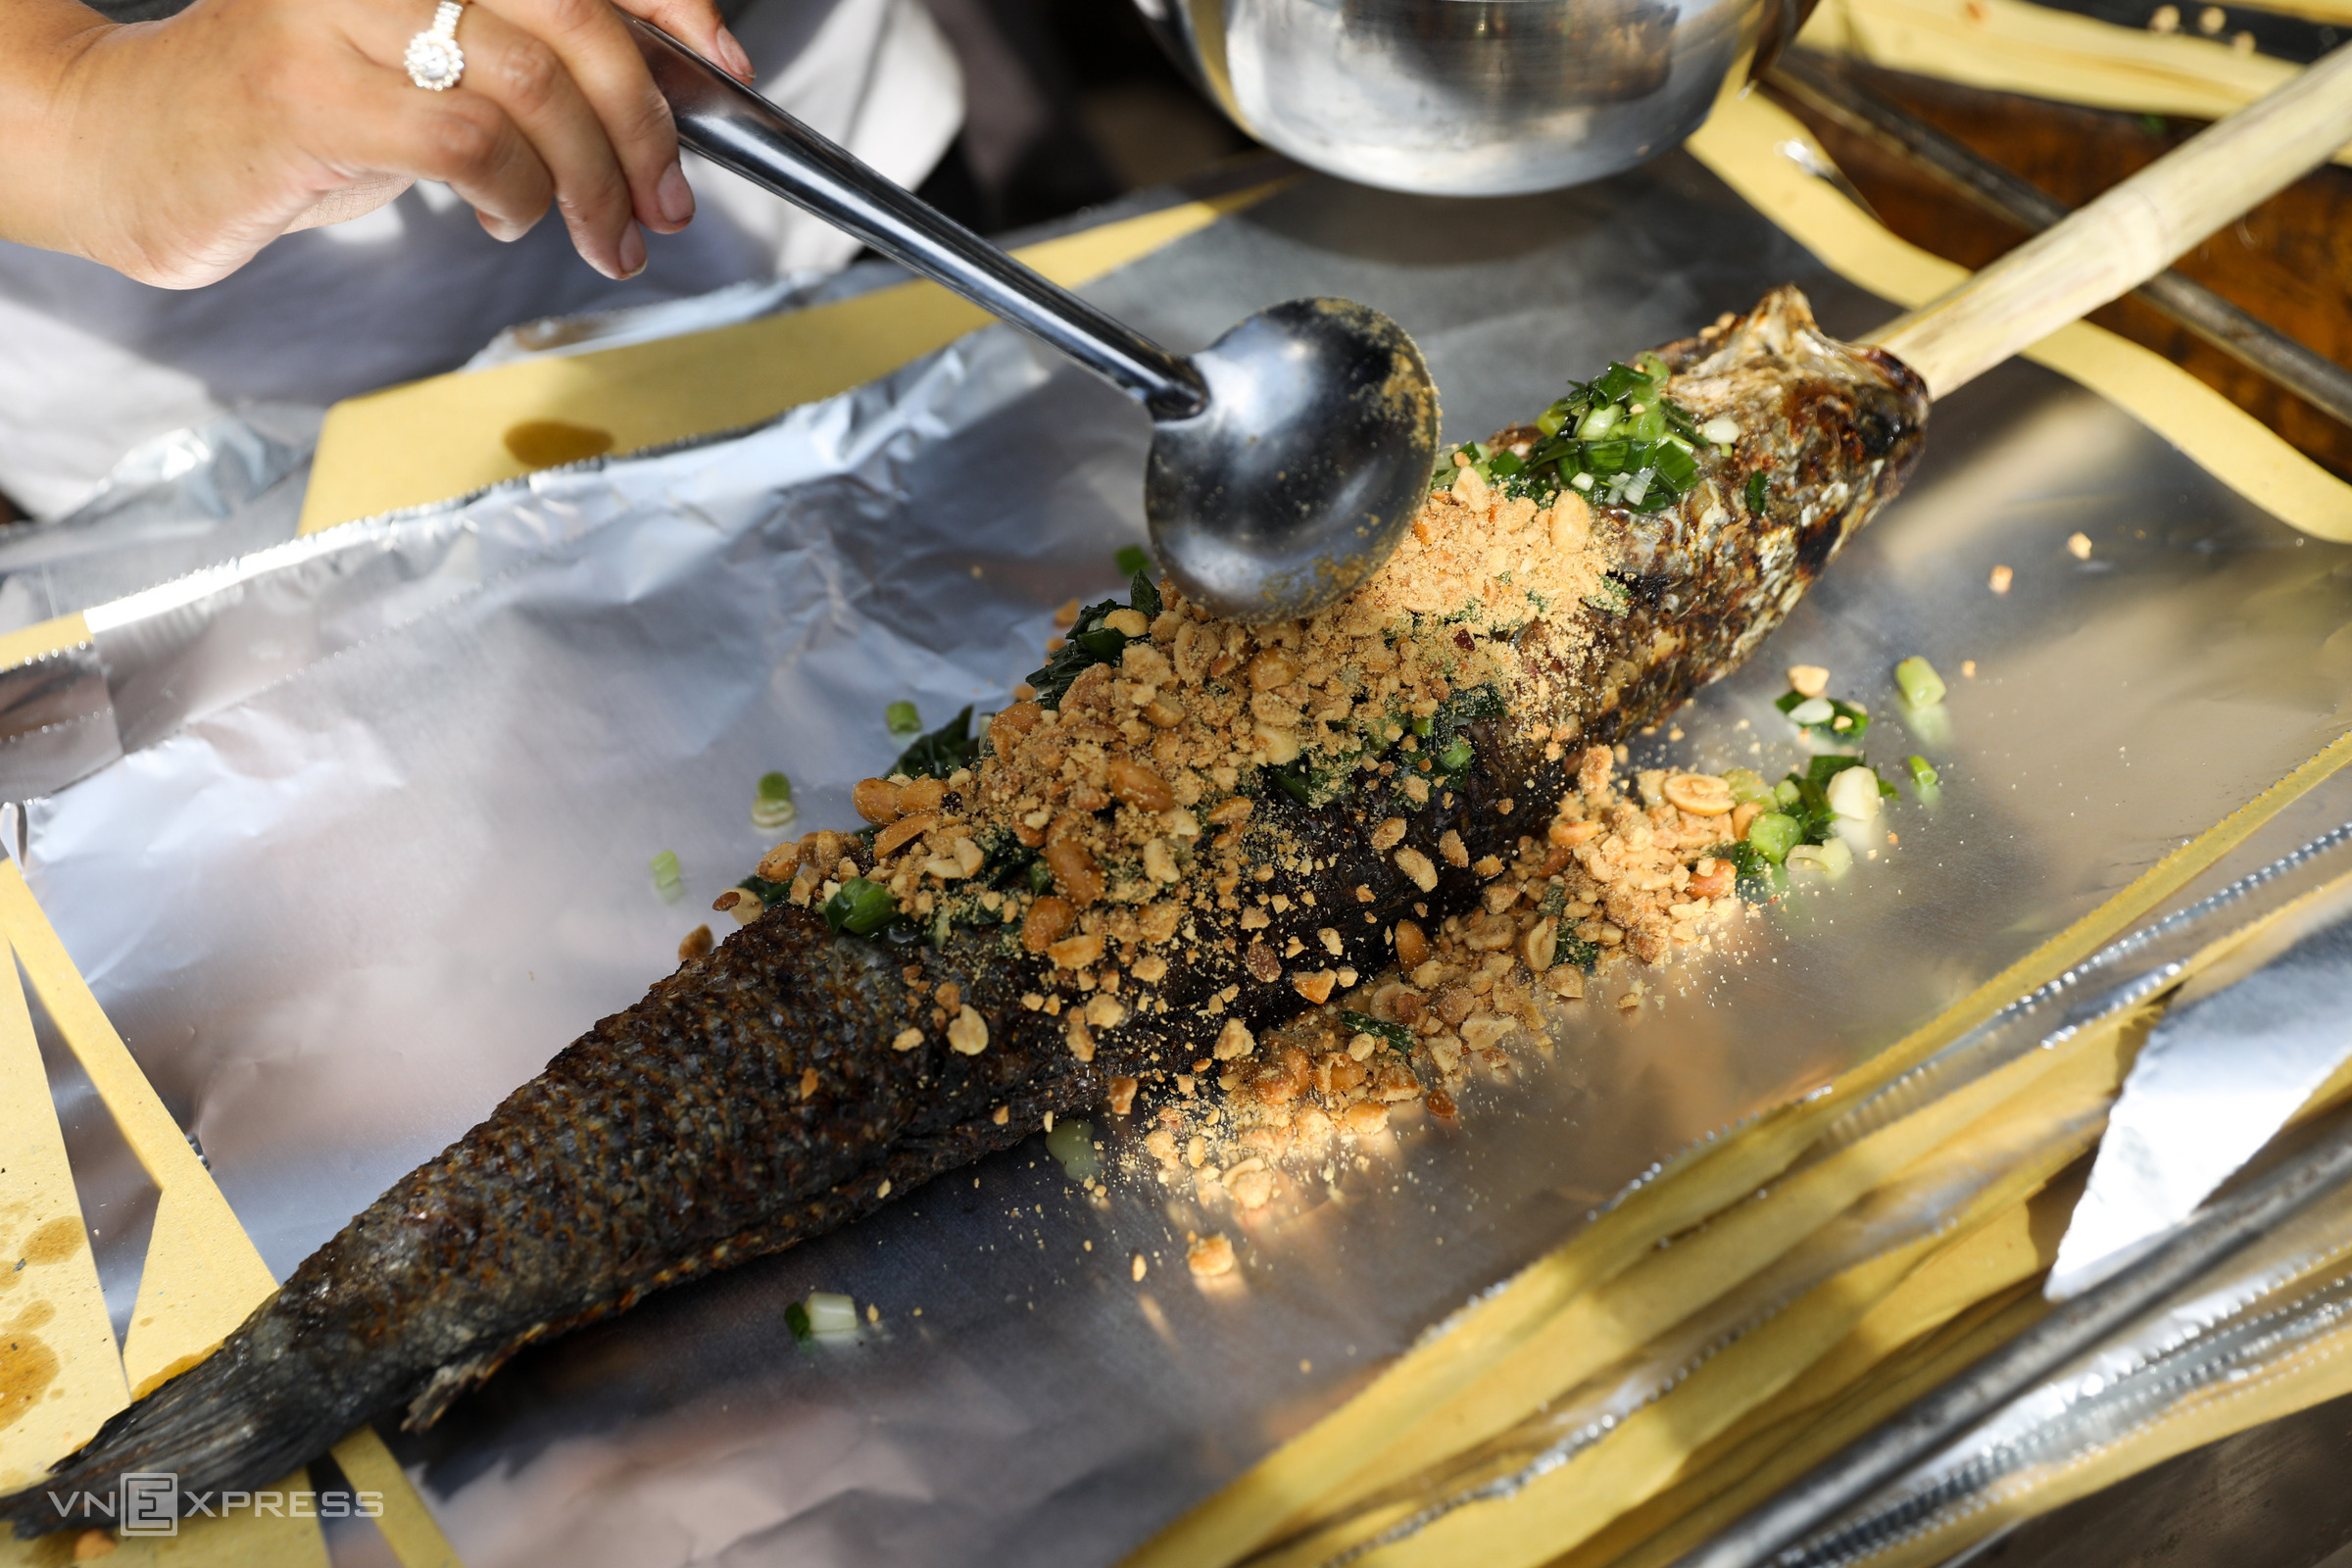 After the customer has finished selecting the fish, it will be garnished with green onion and roasted peanuts before being wrapped in foil. According to the tradition, worshippers must offer a whole fish without scraping off the scales or removing the tail